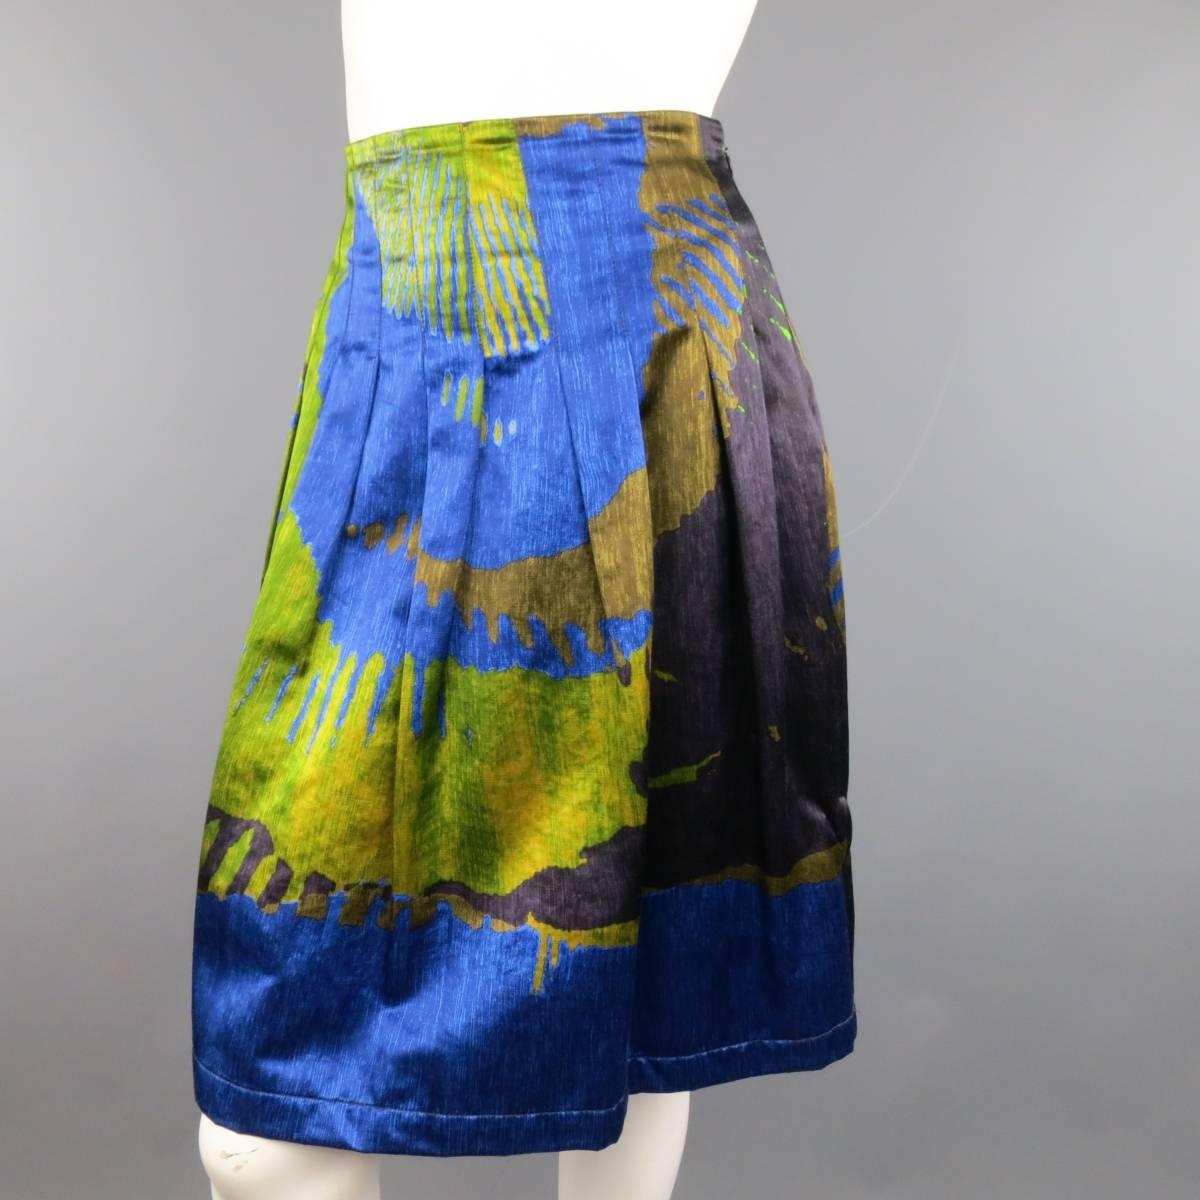 Gray ETRO Skirt - Size 4 - Green & Blue Abstract Print Satin Pleated A Line Skirt